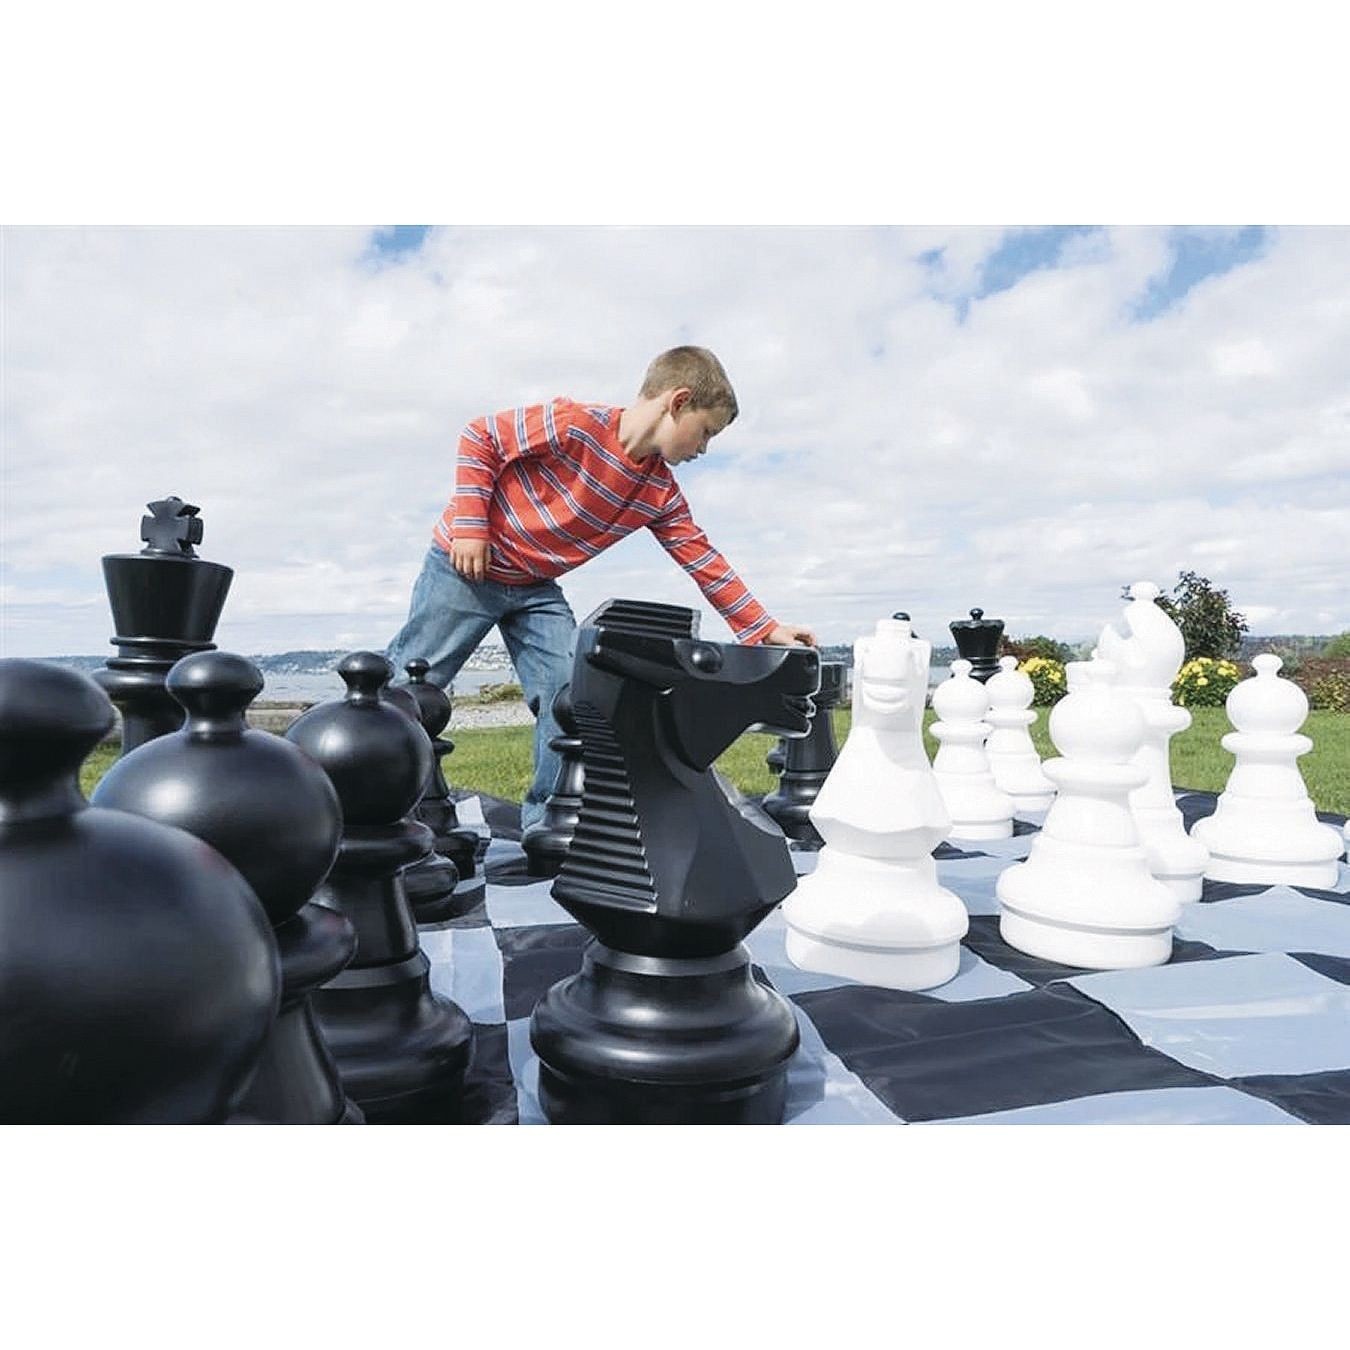 Buy Ginormous Chess Set with 25 King and 9' Fabric Board at S&S Worldwide